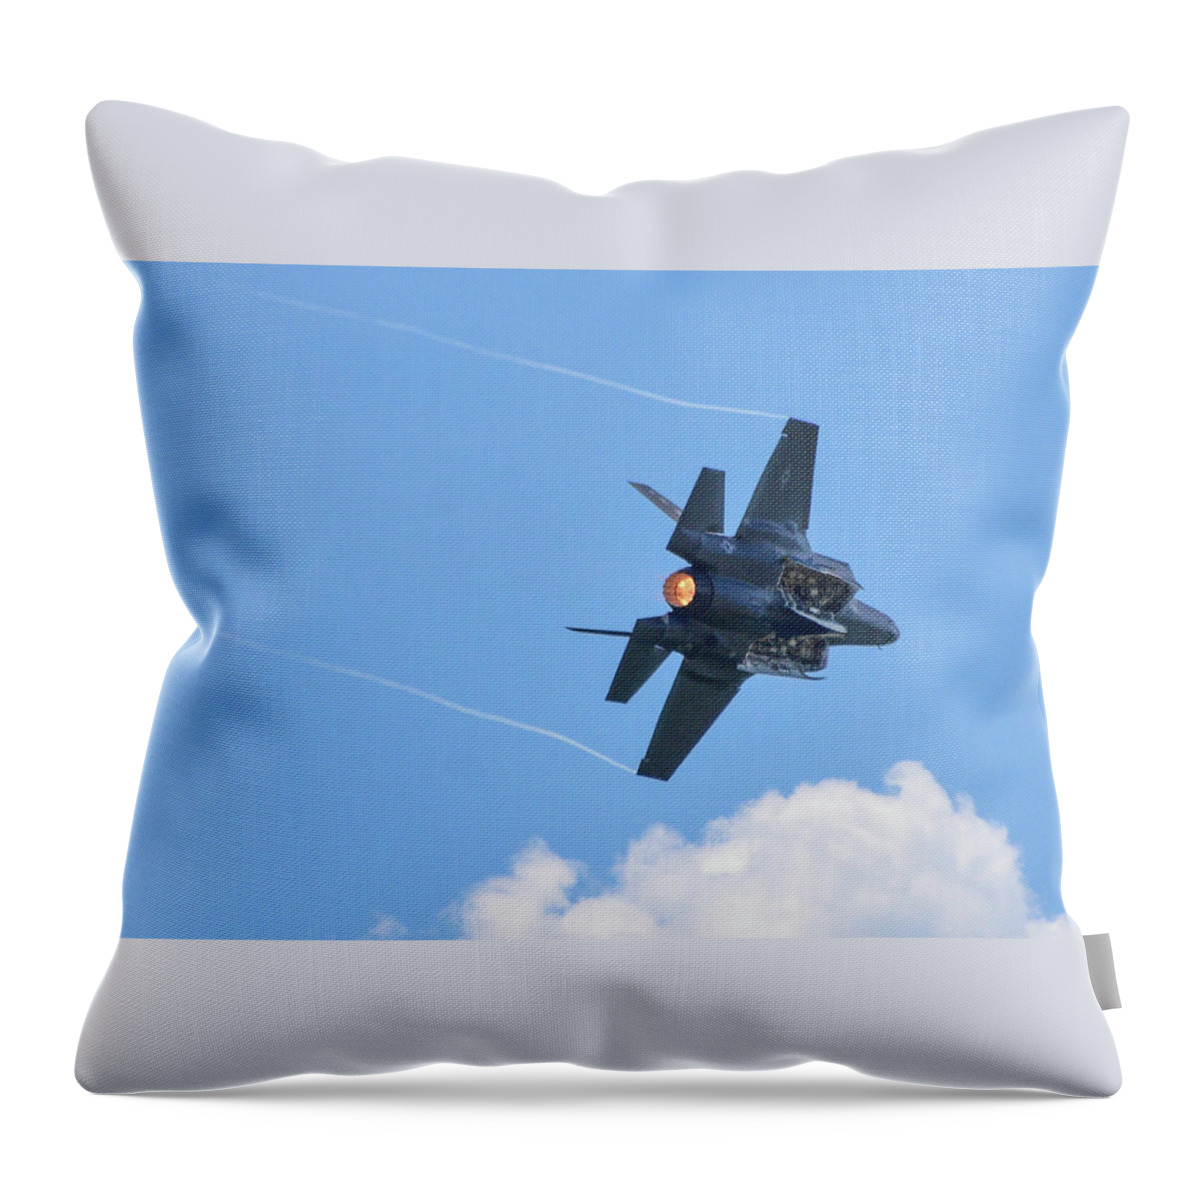 Military Throw Pillow featuring the photograph F35 Afterburner by Ed Stokes